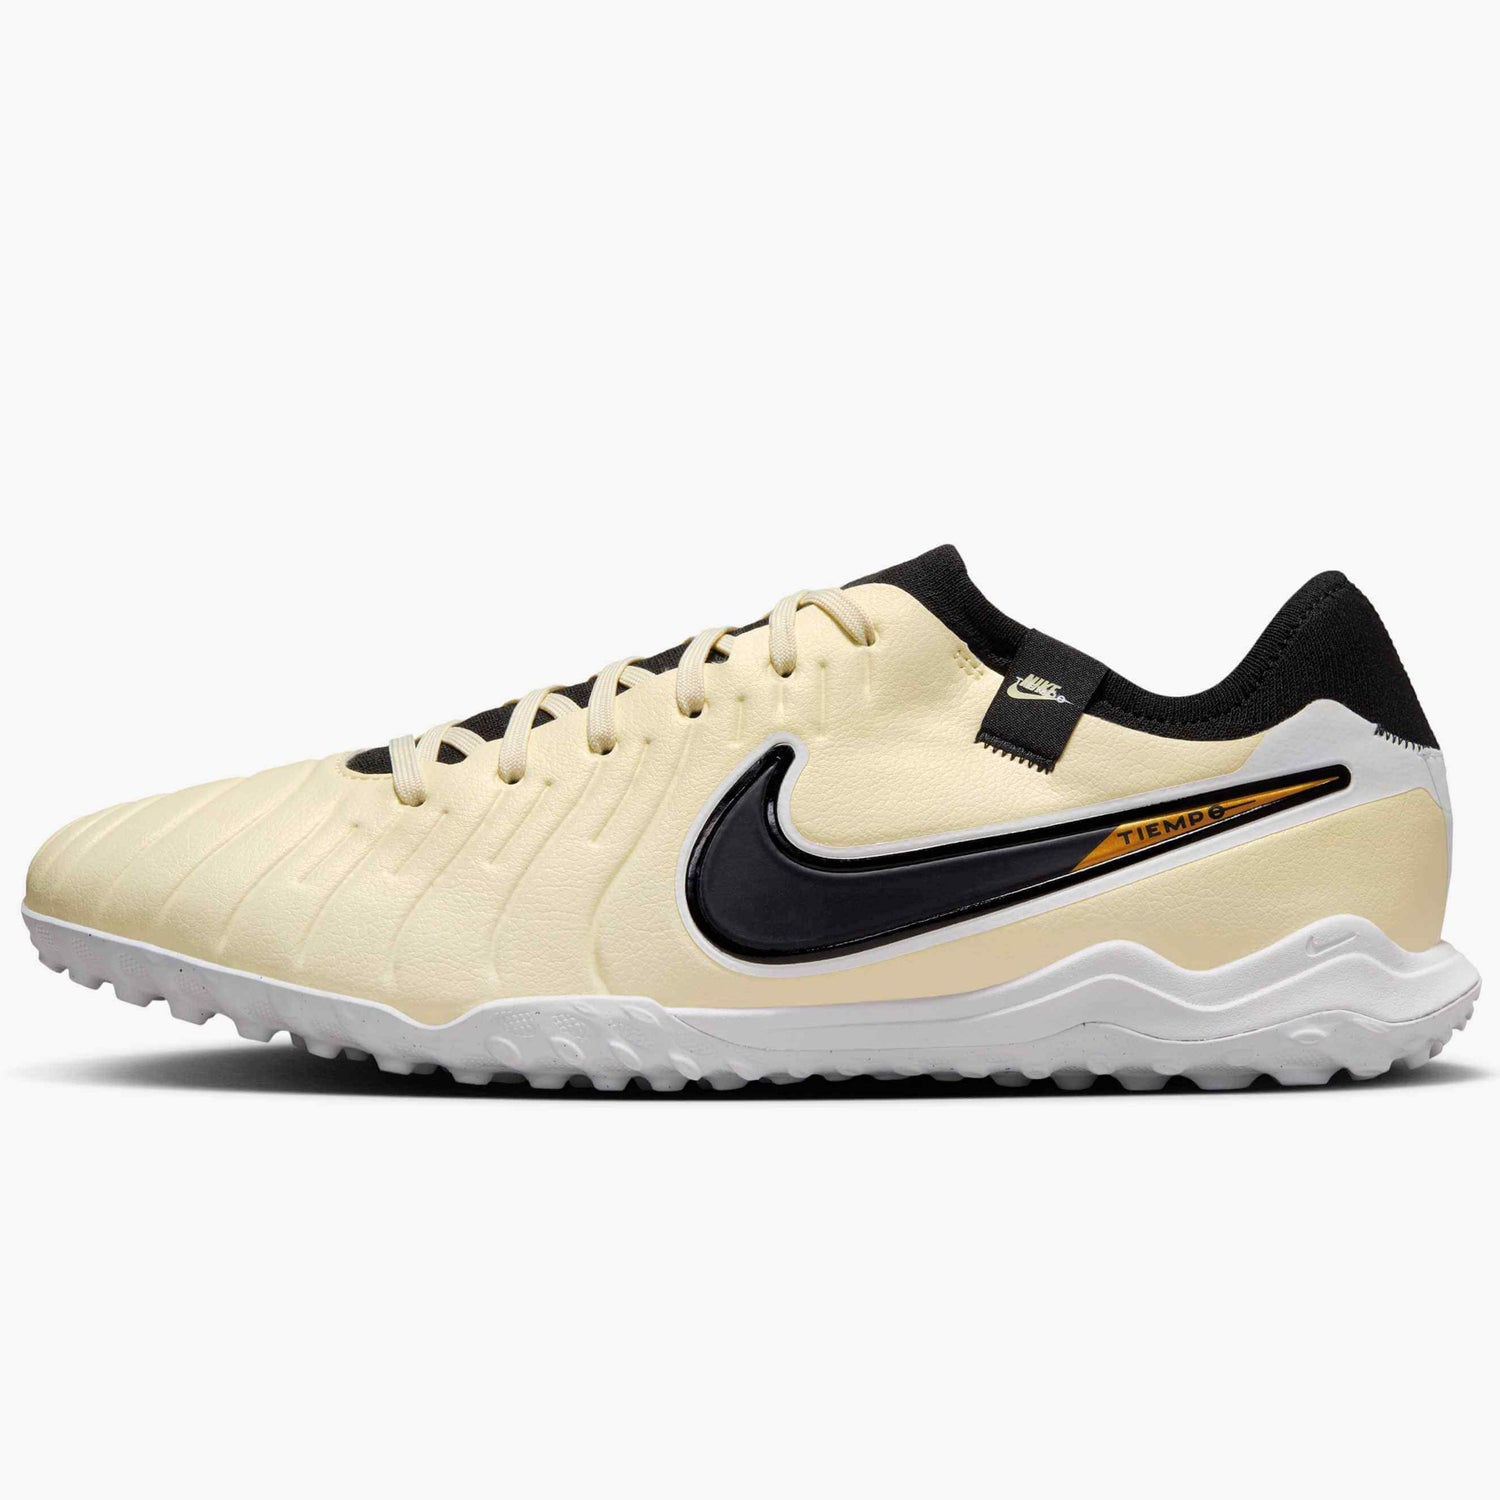 Nike Legend 10 Pro Turf - Mad Ready Pack (SP24) (Side 1)